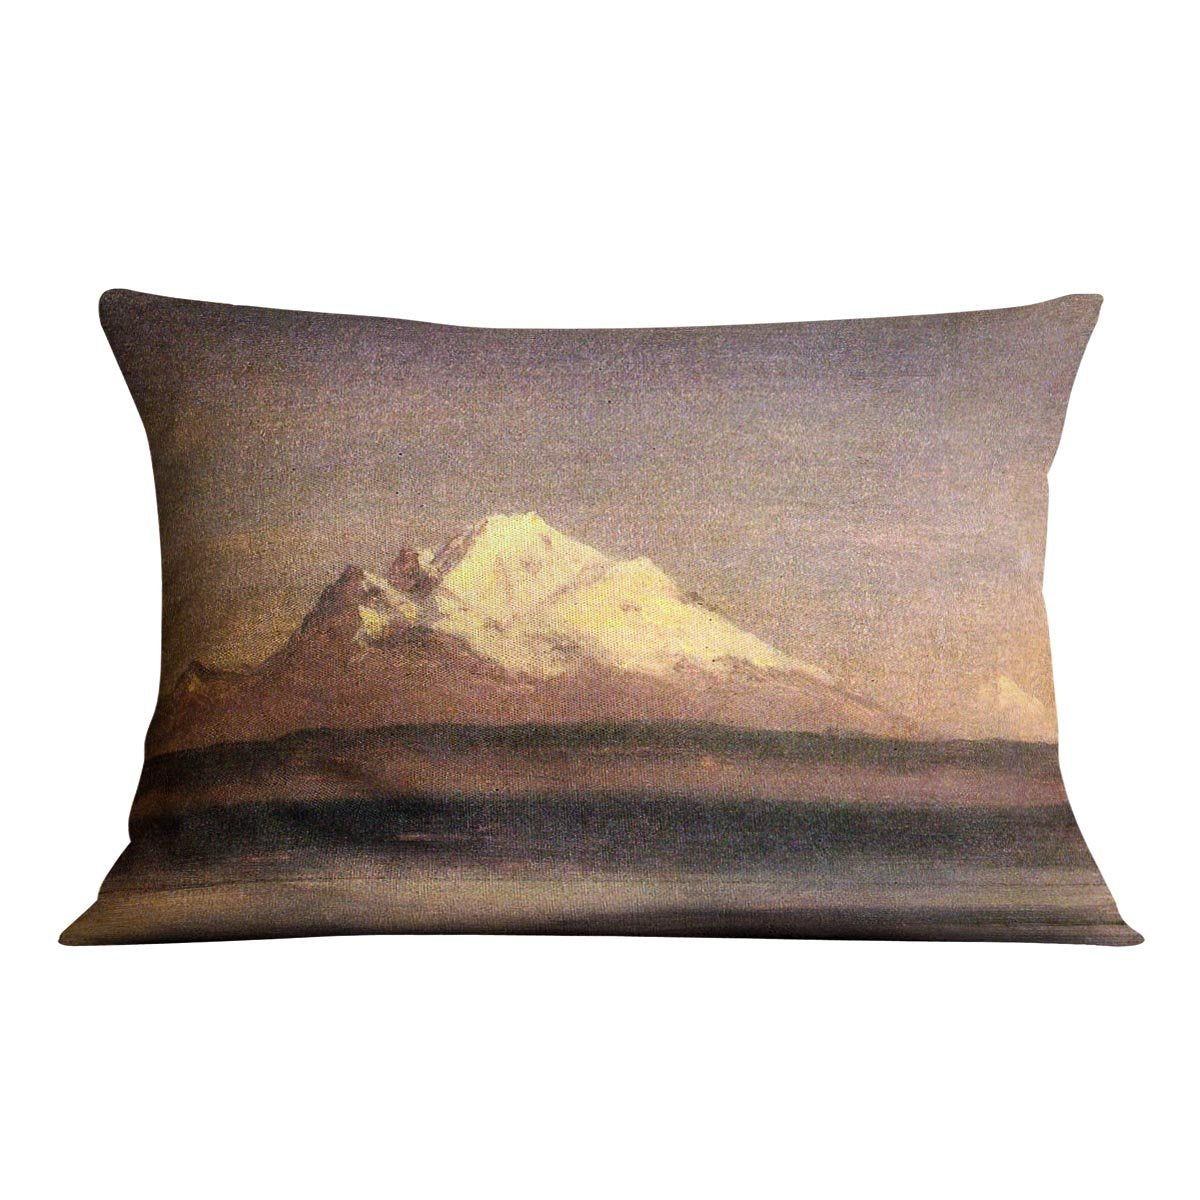 Snowy Mountains in the Pacific Northwest 2 by Bierstadt Cushion - Canvas Art Rocks - 4